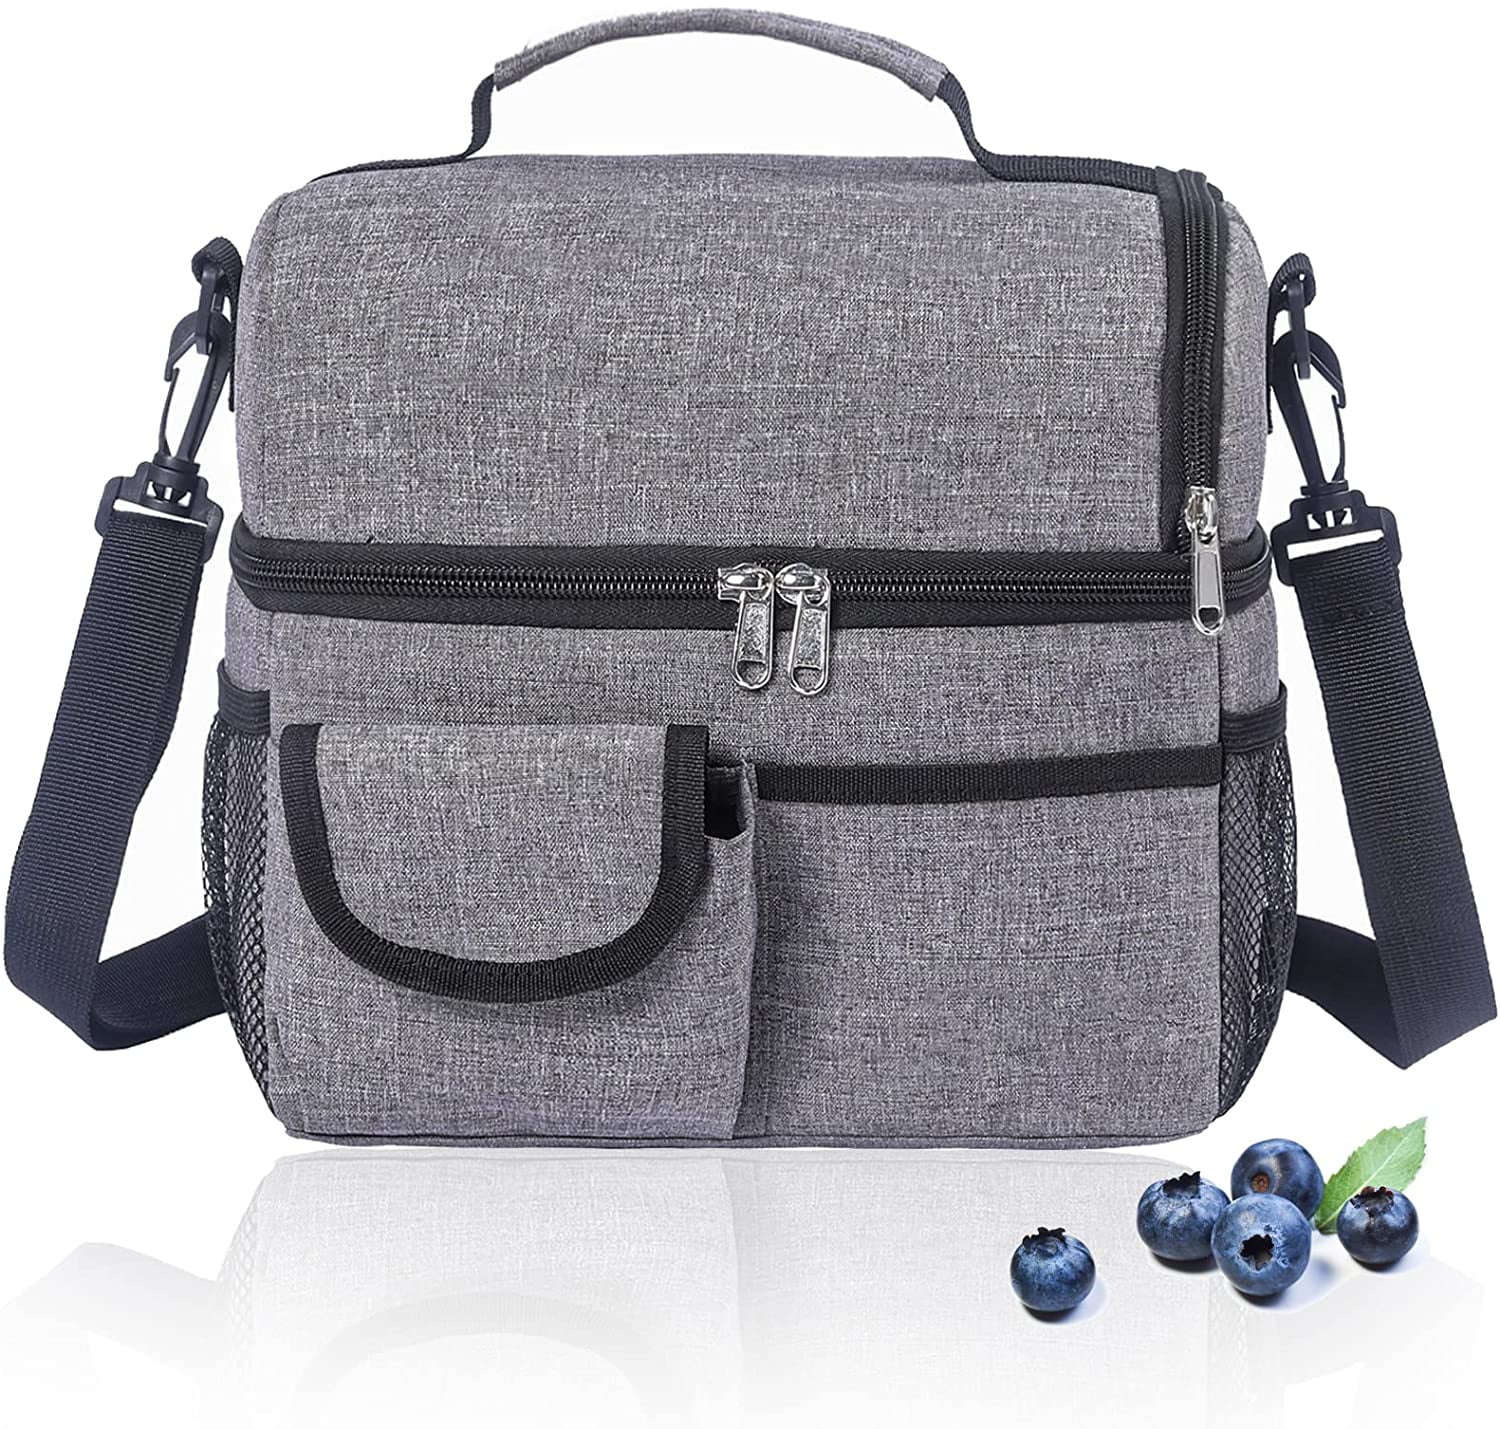 Style A-Light Grey Insulated Lunch Bag with Dual Compartment Leak Proof Liner Cooler Bag with Adjustable Shoulder Strap Water-Resistant Lunch Box for Office/Picnic/Hiking/Beach 